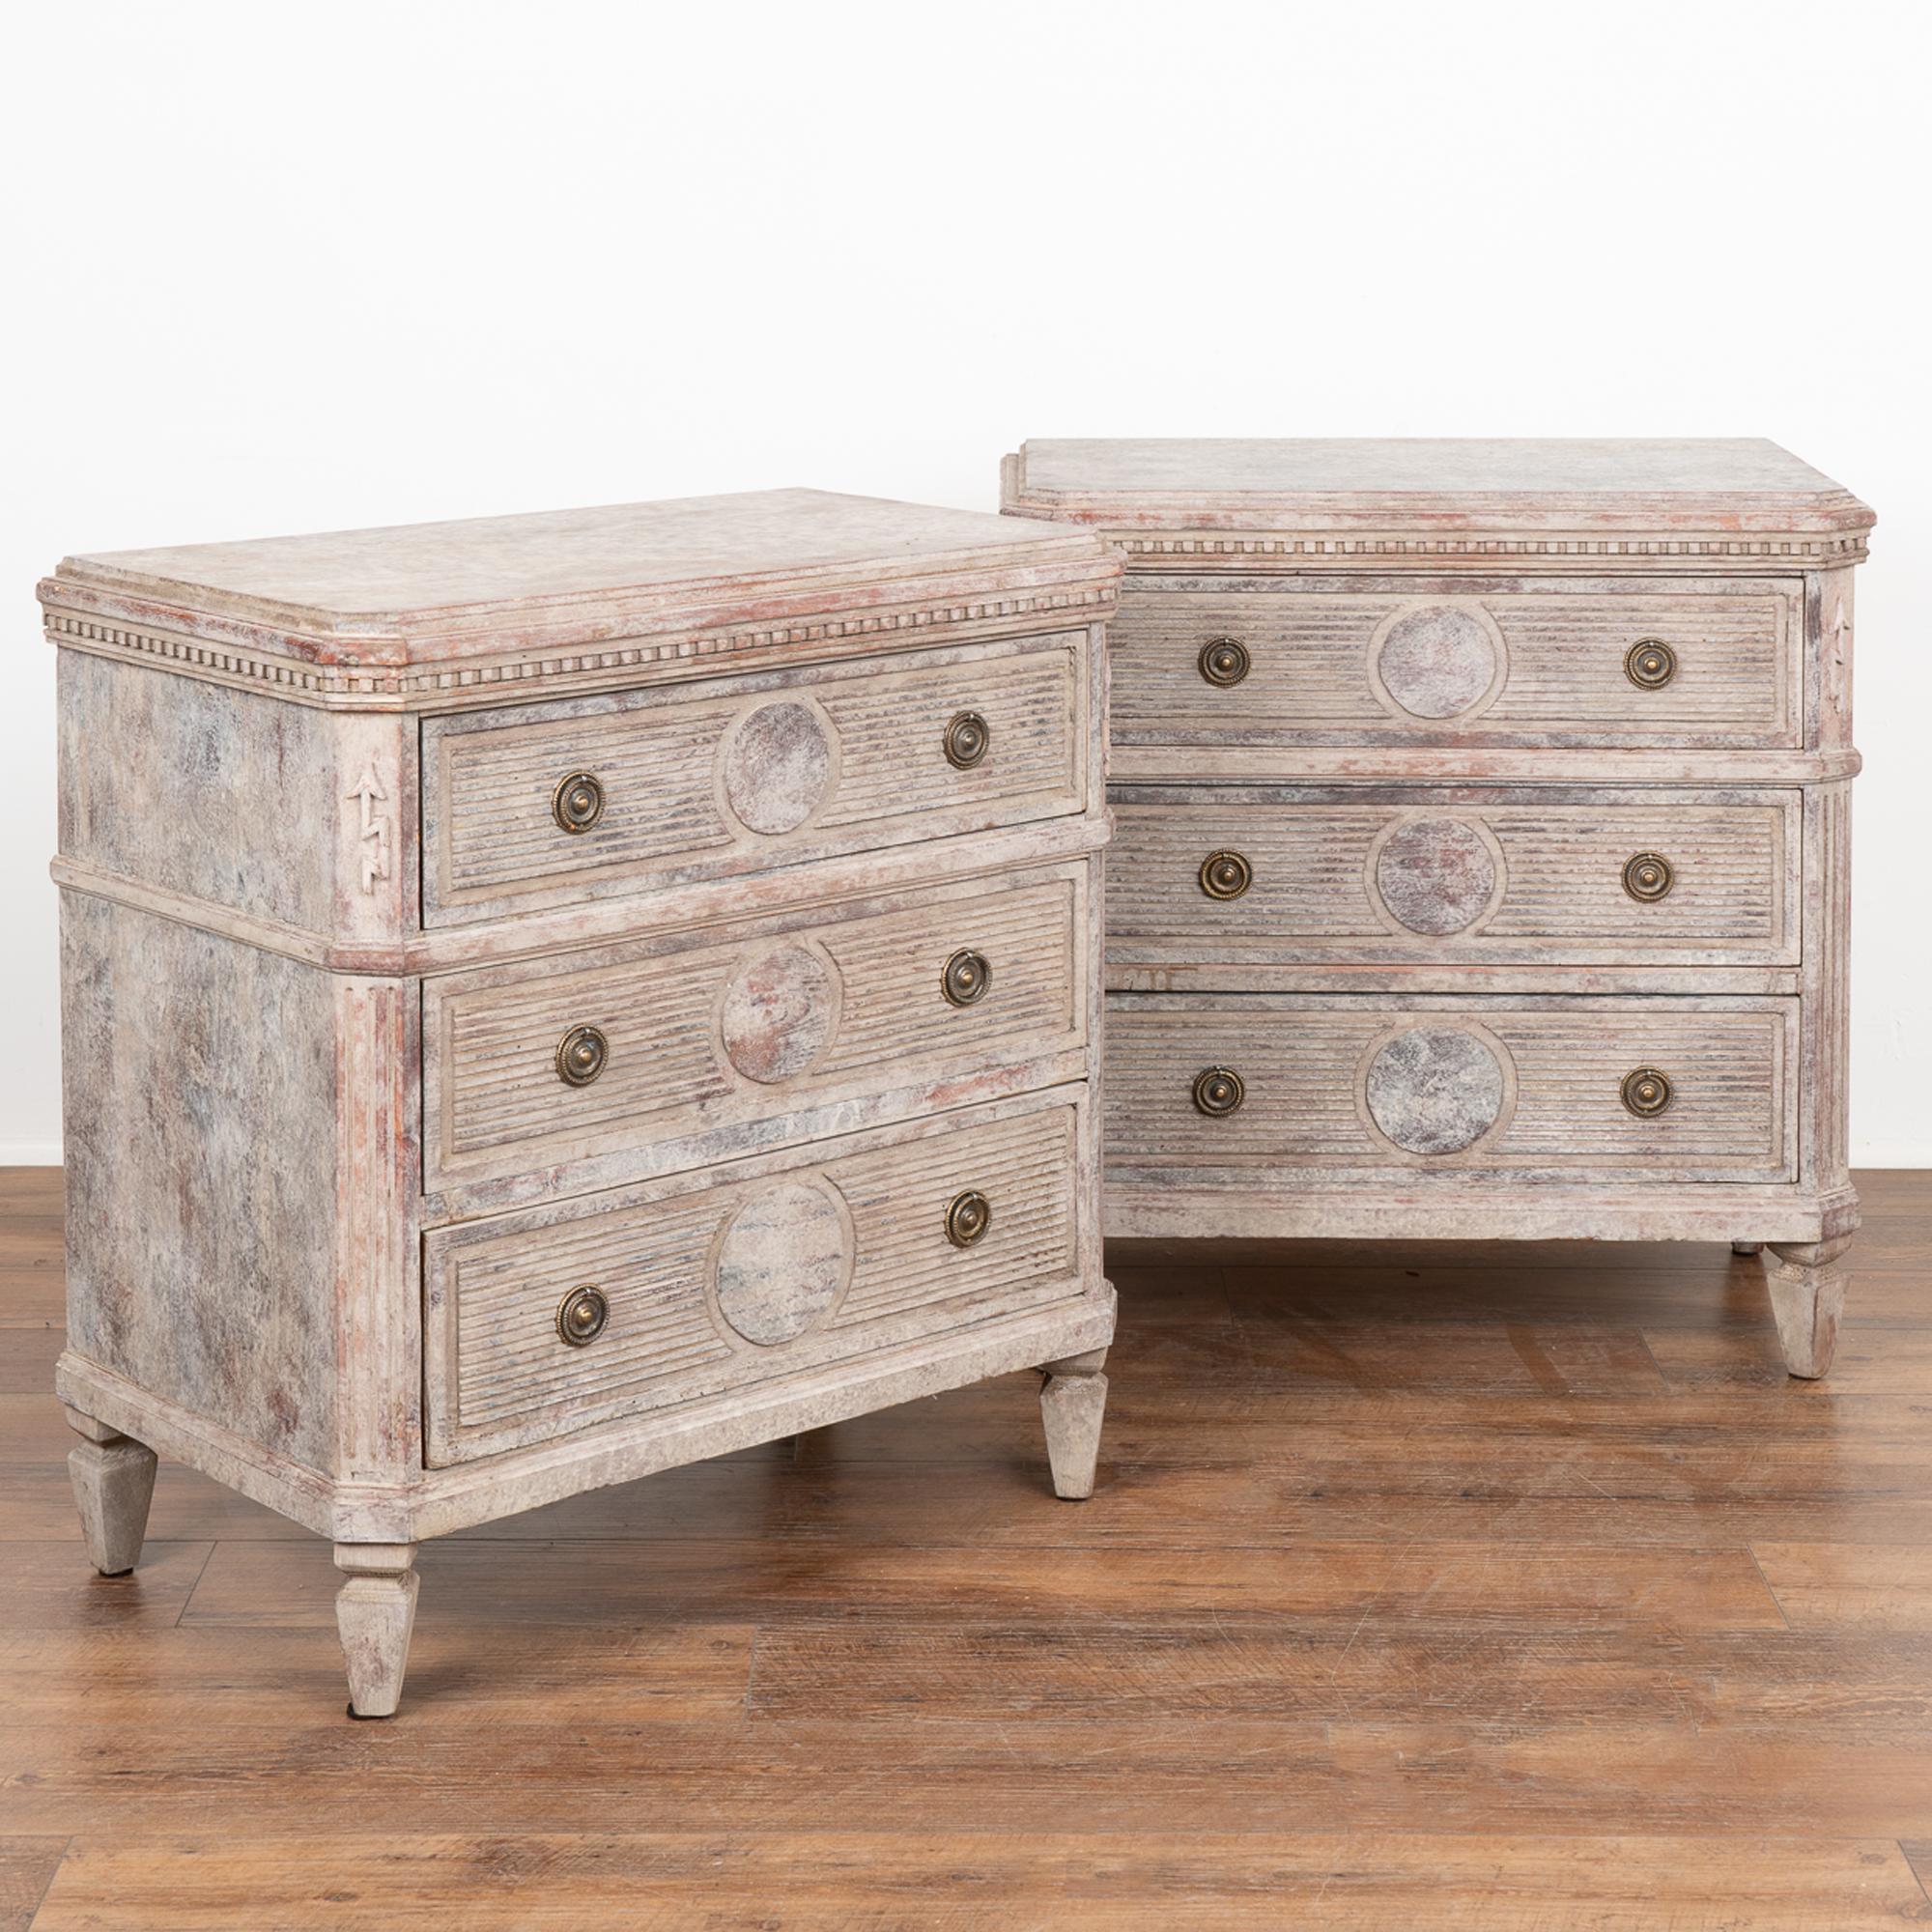 A pair of decorative Gustavian pine chest of drawers painted in mottled shades of  gray and plum.
Canted fluted side posts with unique arrow carving at top, dentil molding, and fluted drawers with circular panel in middle all raised on four tapered